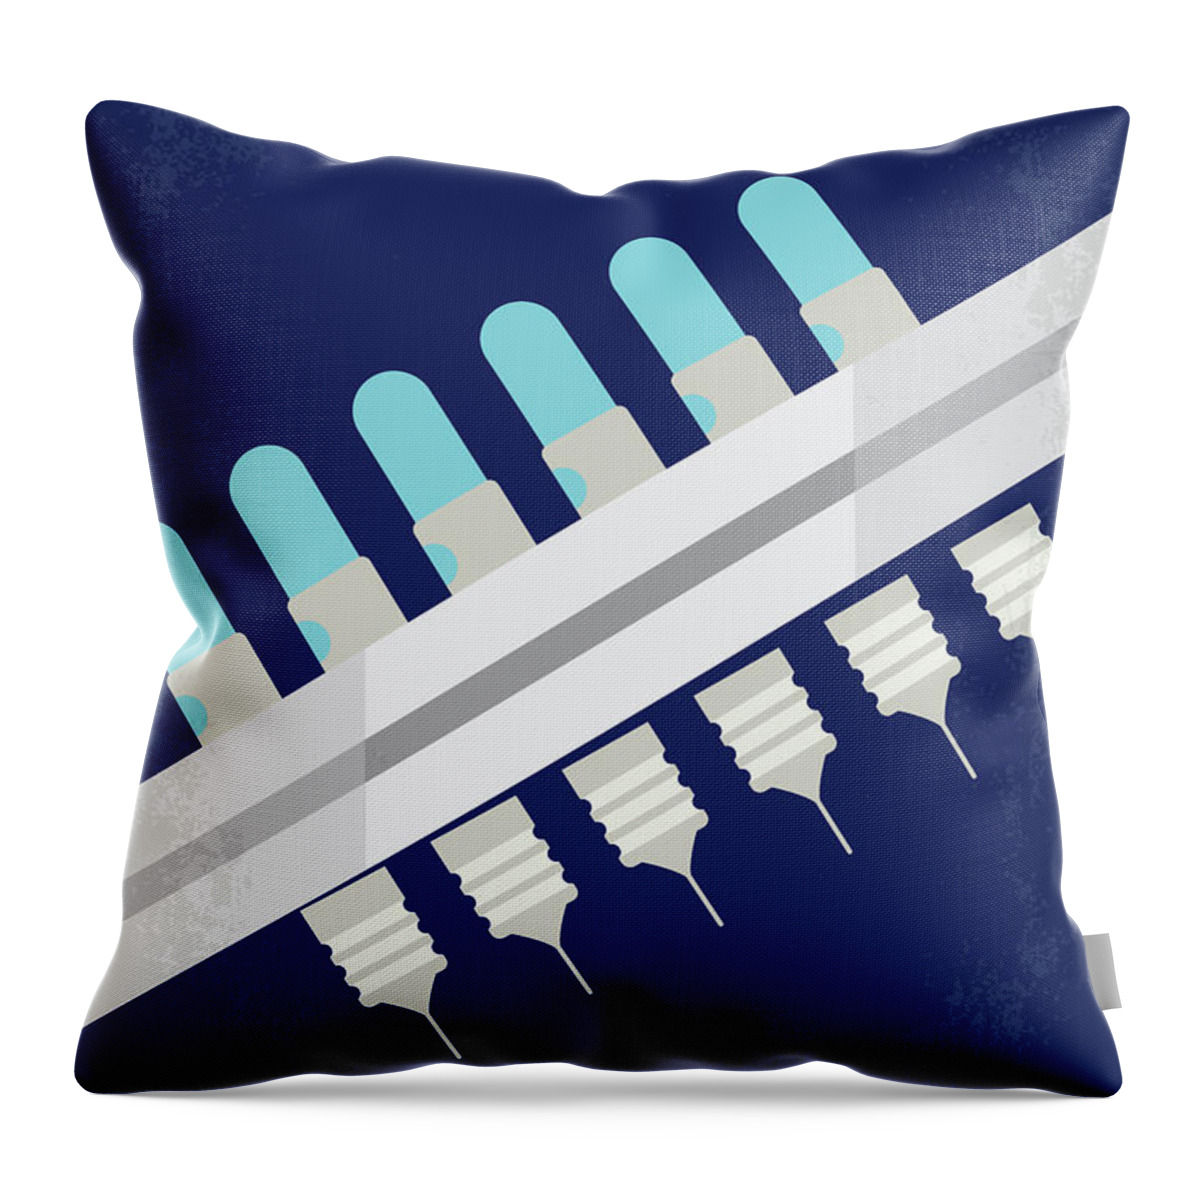 Blade Throw Pillow featuring the digital art No896 My Blade minimal movie poster by Chungkong Art